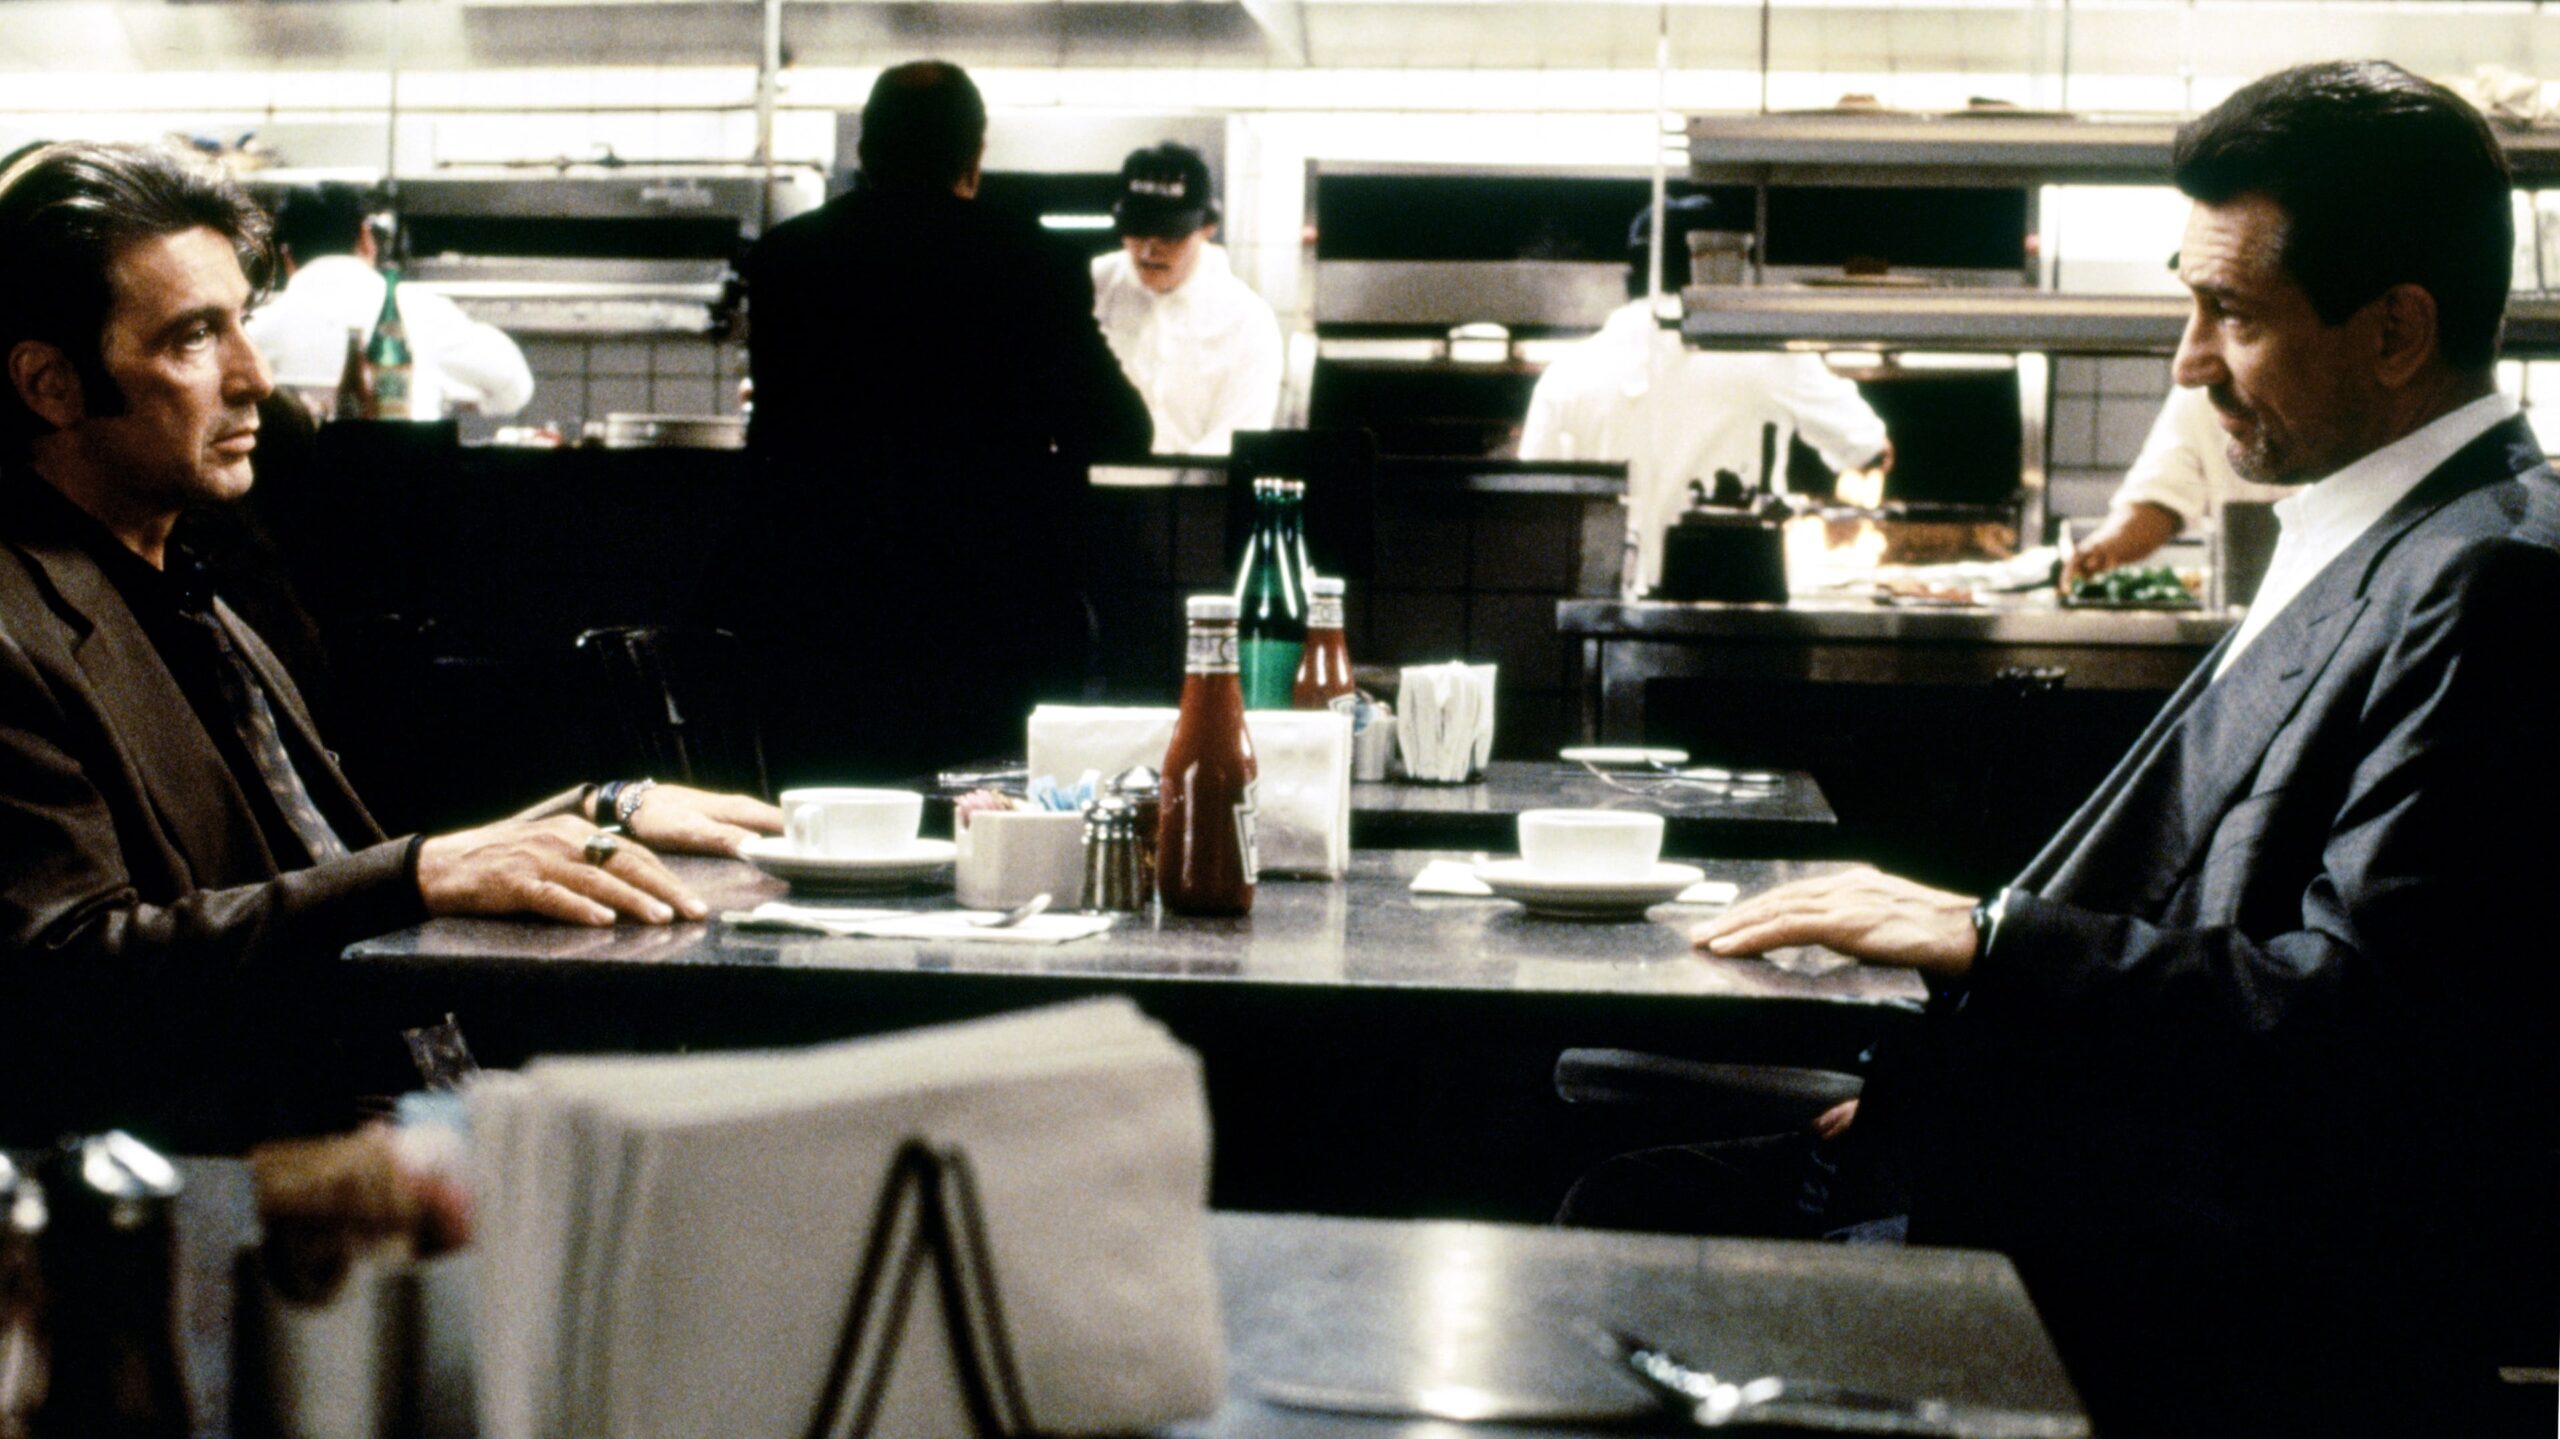 Meeting on screen in the restaurant in Heat (1995)